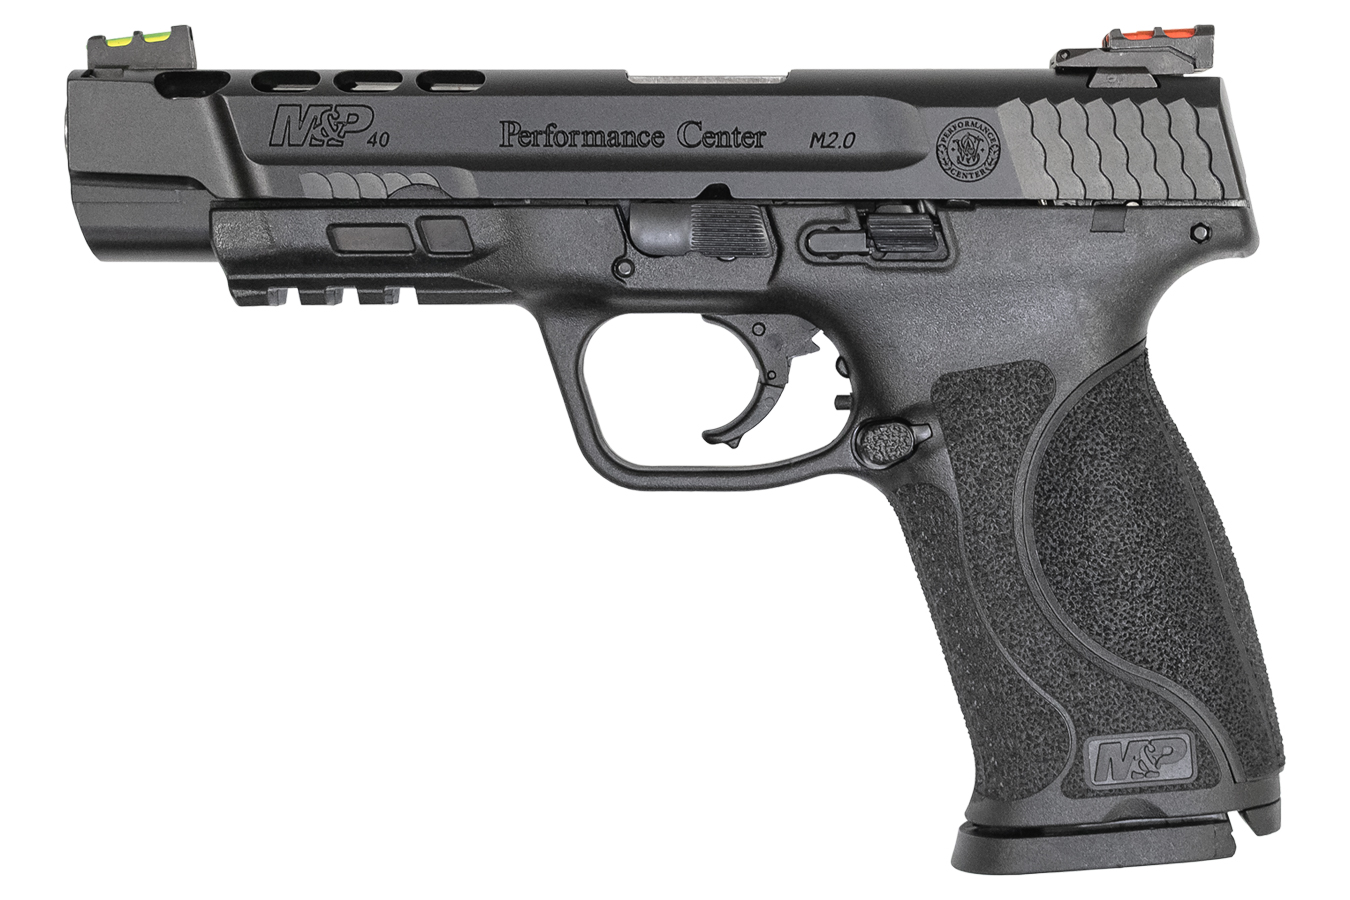 SMITH AND WESSON MP40 M2.0 5IN PC PORTED